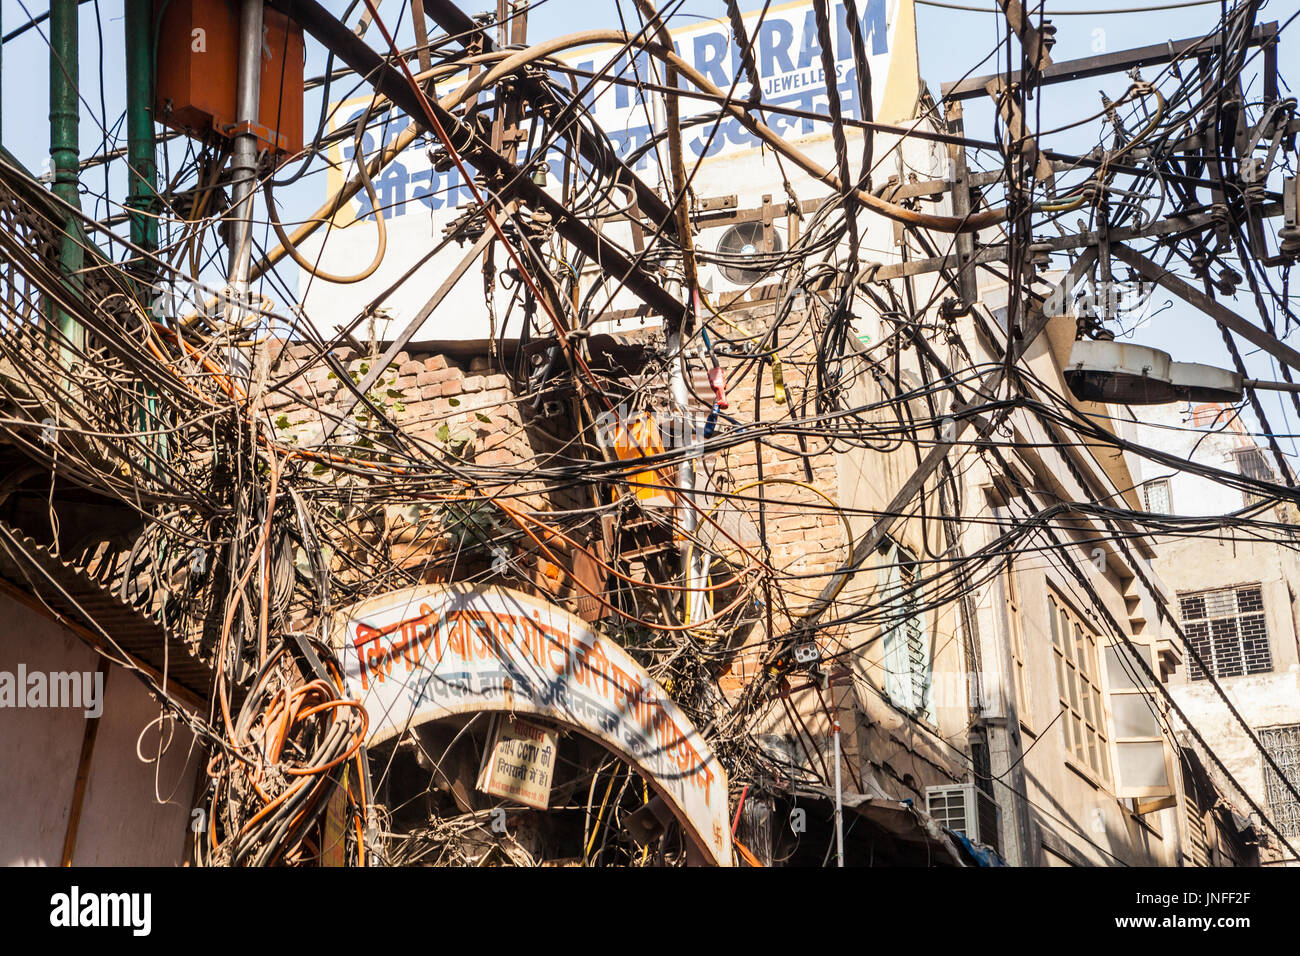 A tangle of utility wires and cables above the streets in Chandni Chowk, a wholesale market in Old Delhi, India. Stock Photo